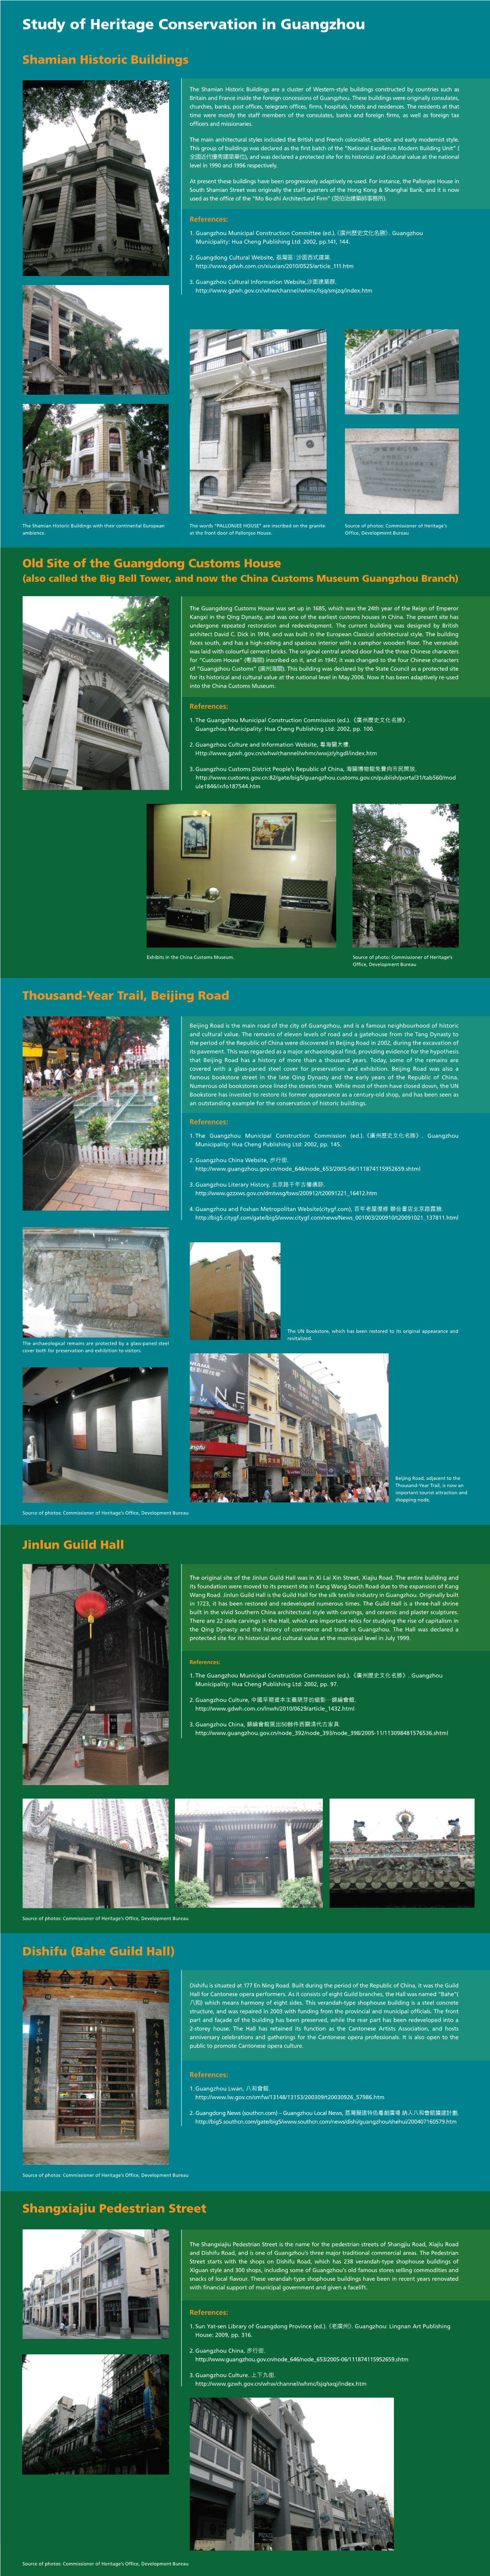 Study of Heritage Conservation in Guangzhou